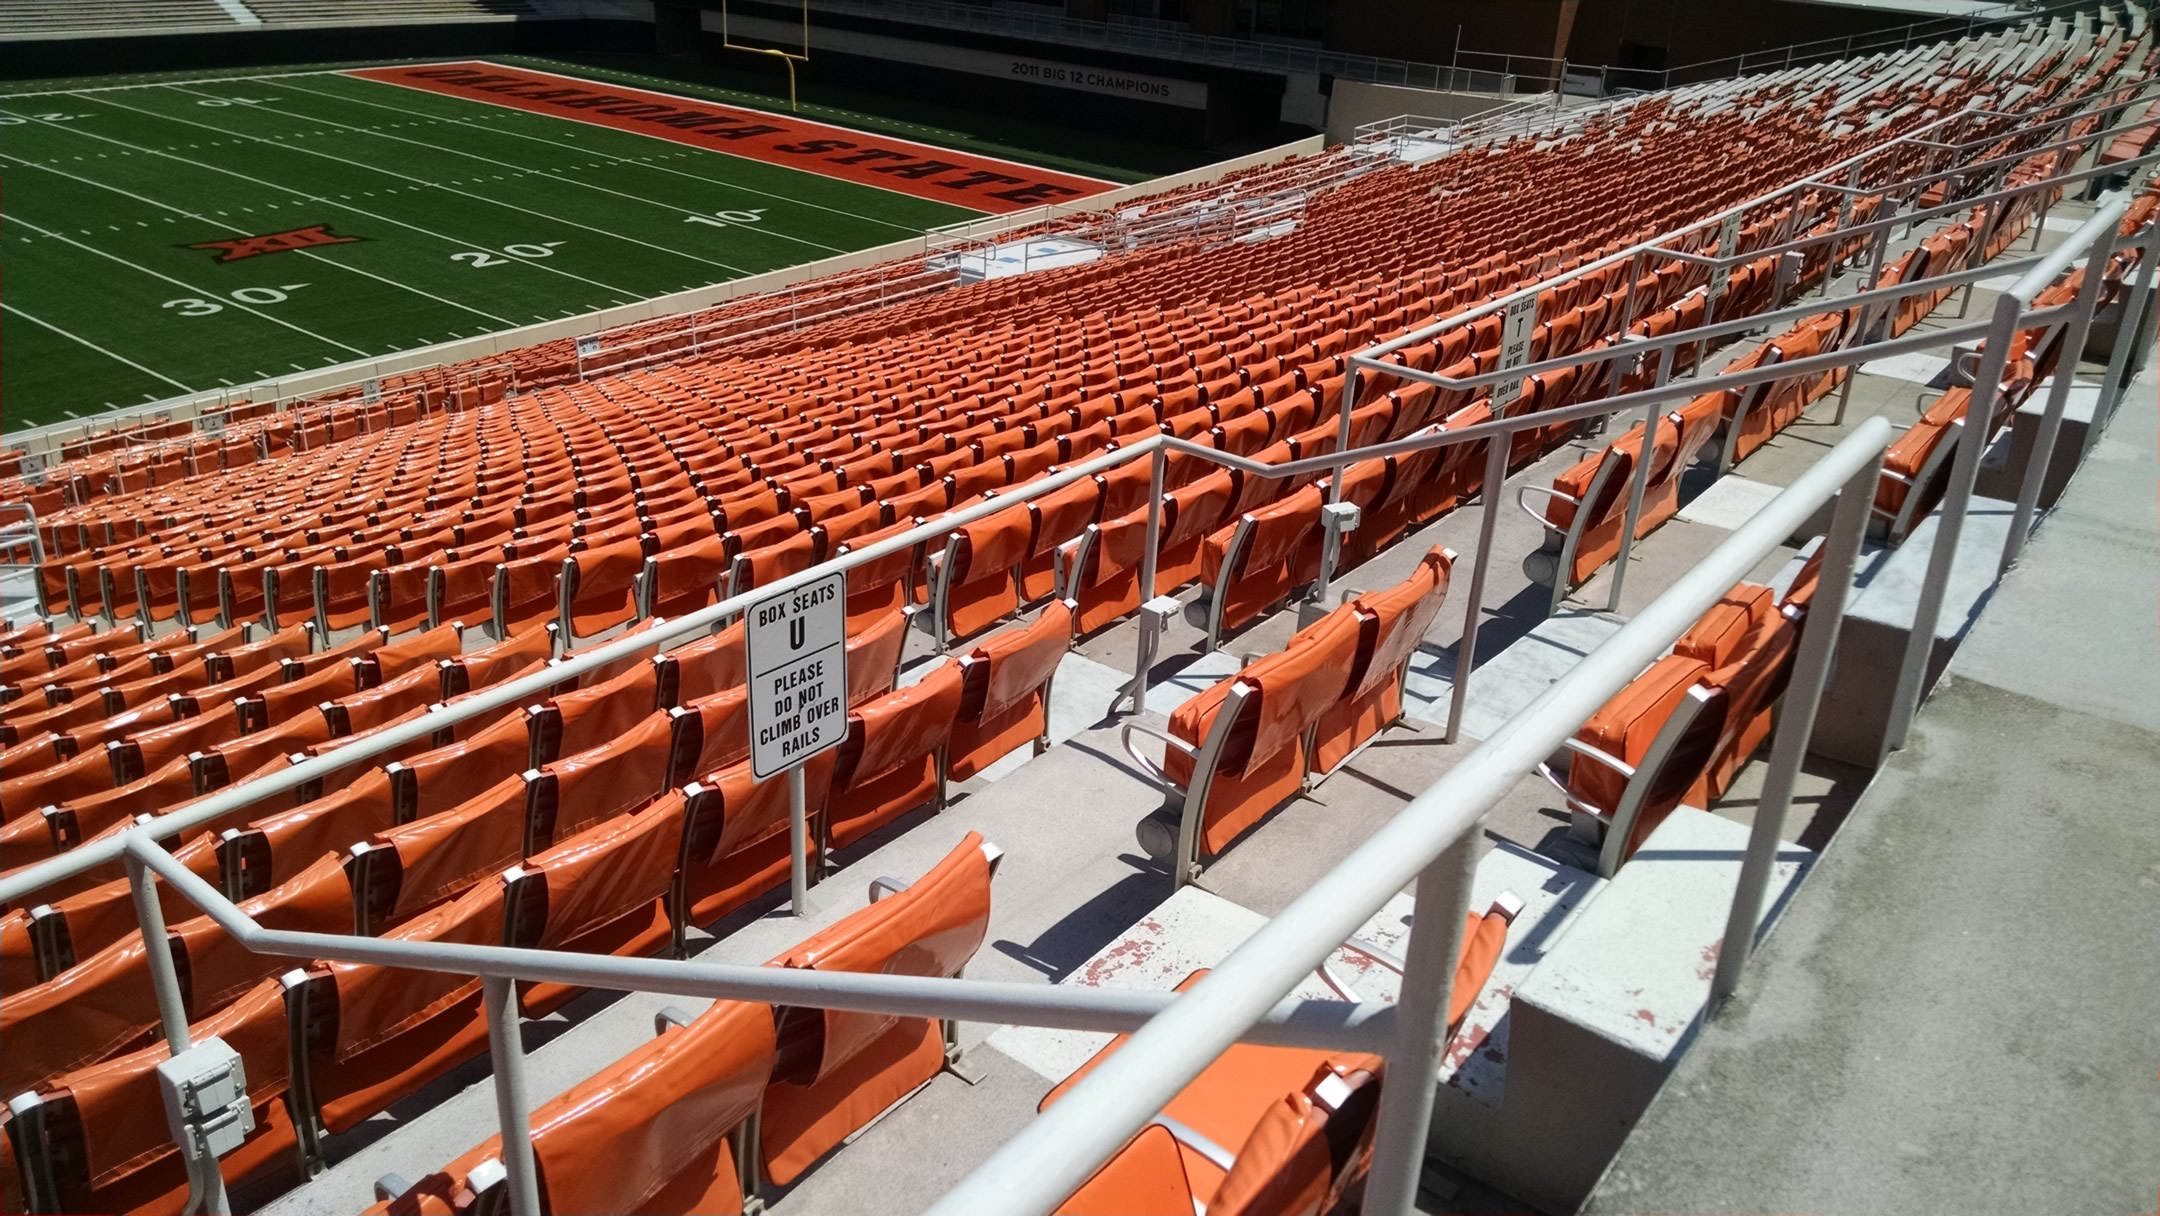 Seating Chart For Boone Pickens Stadium